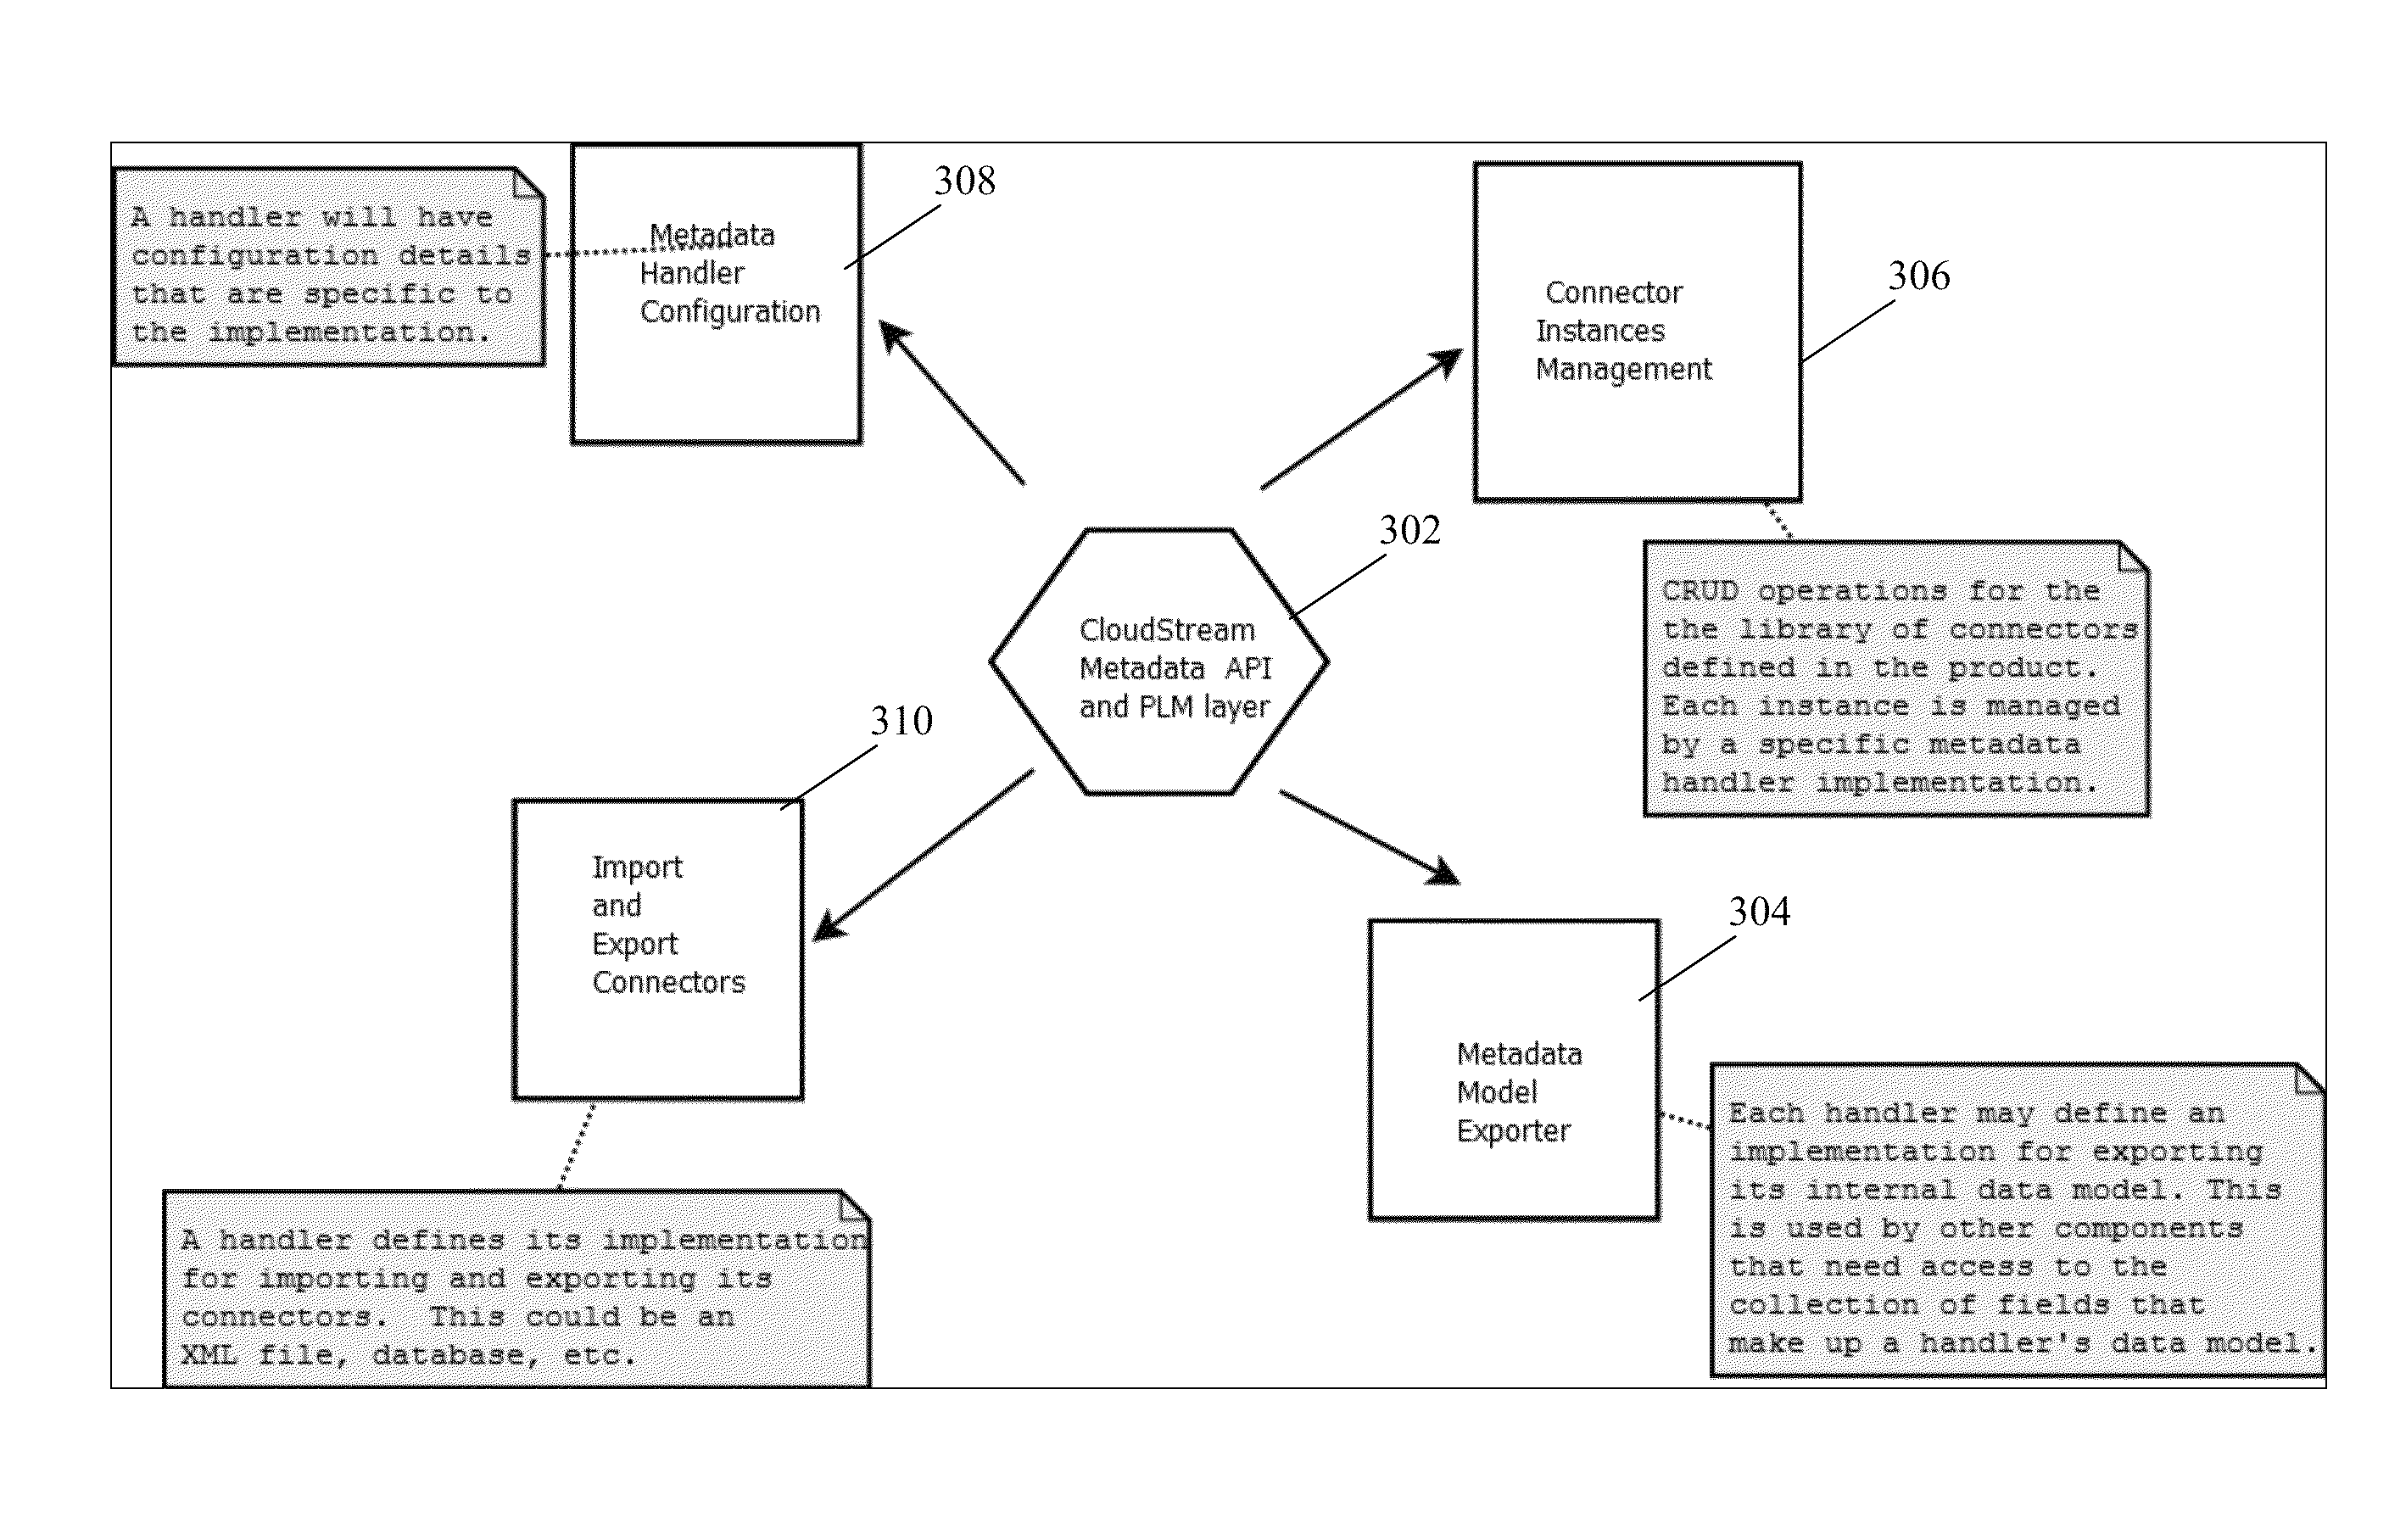 Systems and/or methods for supporting a generic framework for integration of on-premises and SaaS applications with security, service mediation, administrative, and/or monitoring capabilities